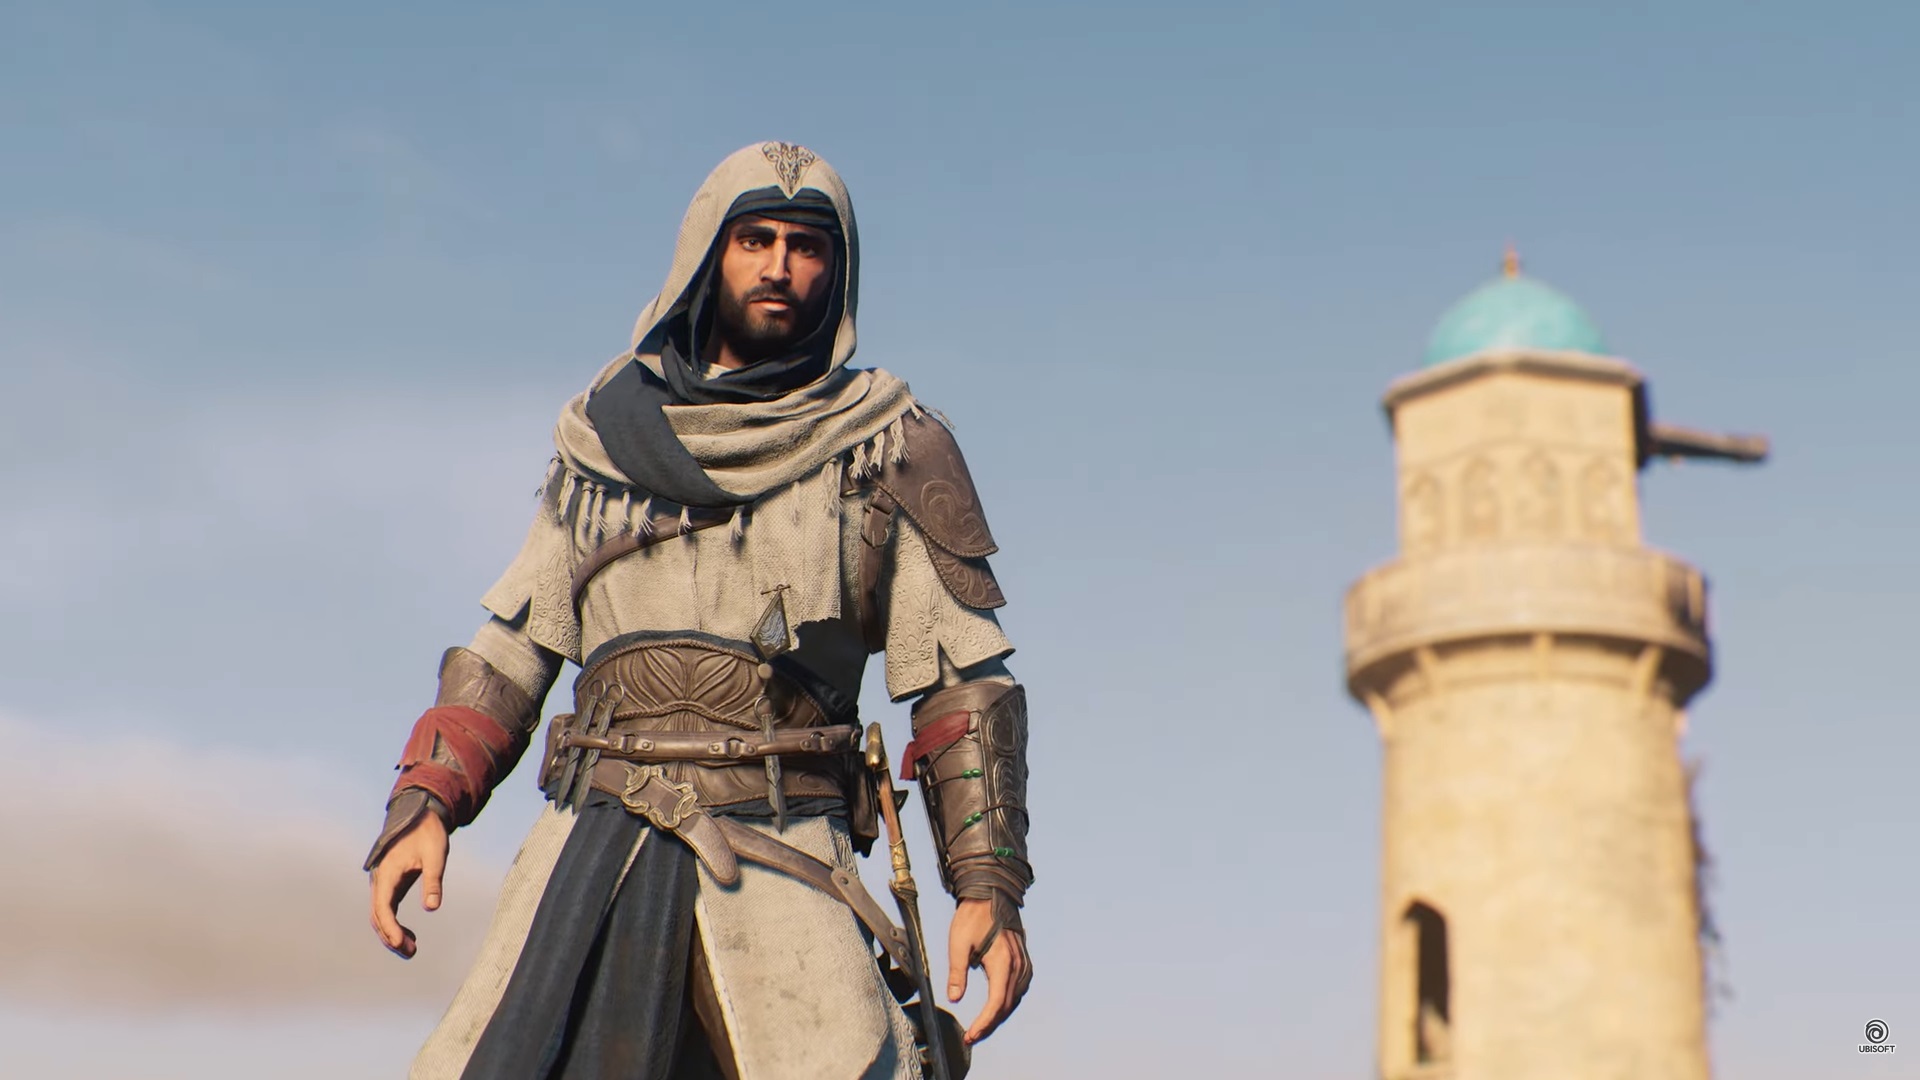 Assassin's Creed Mirage Review Roundup - GameSpot